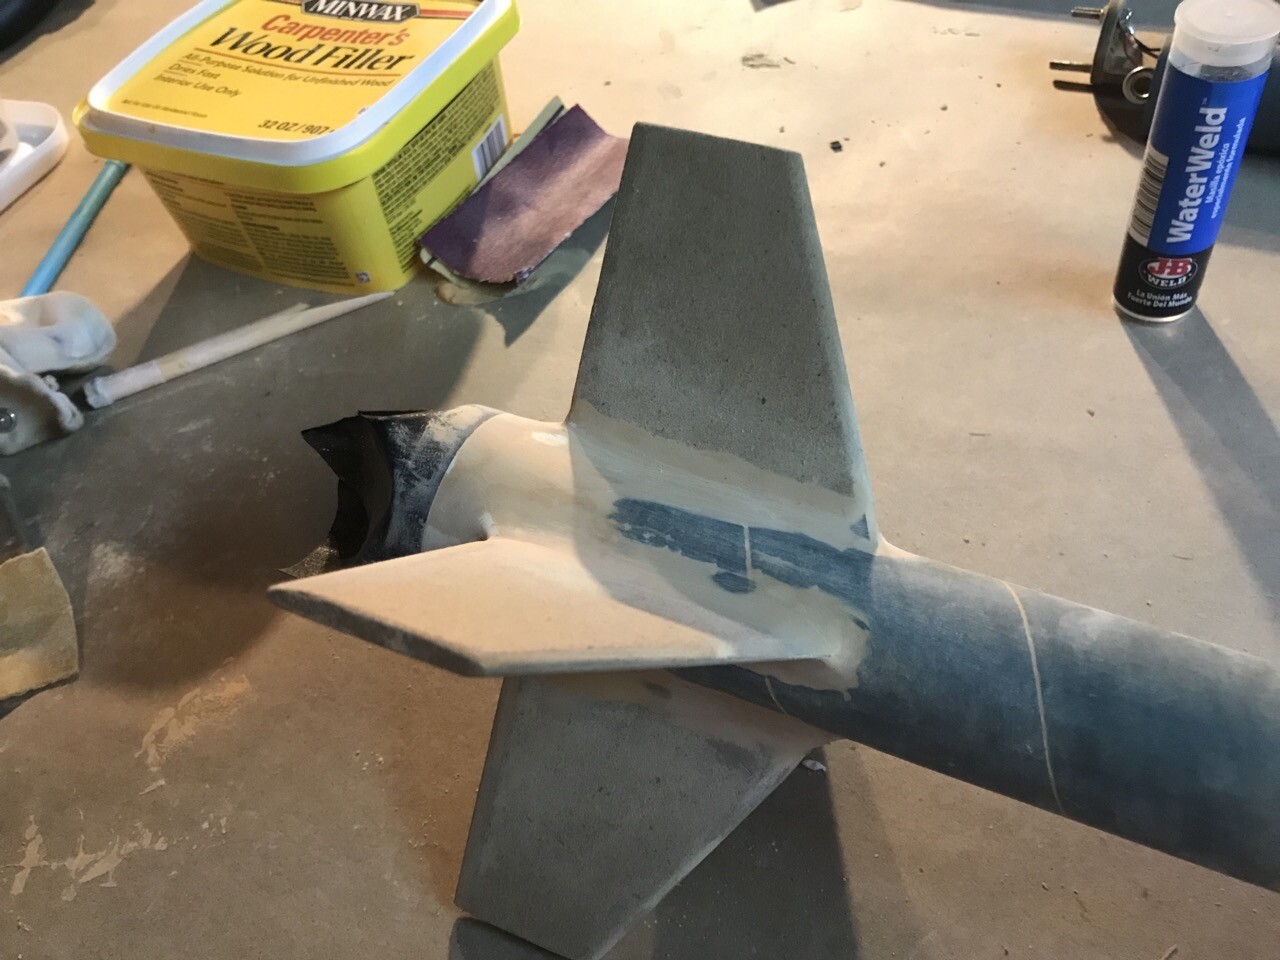 Tail end of rocket with the beginnings of some filler for fin and engine retainer fillets